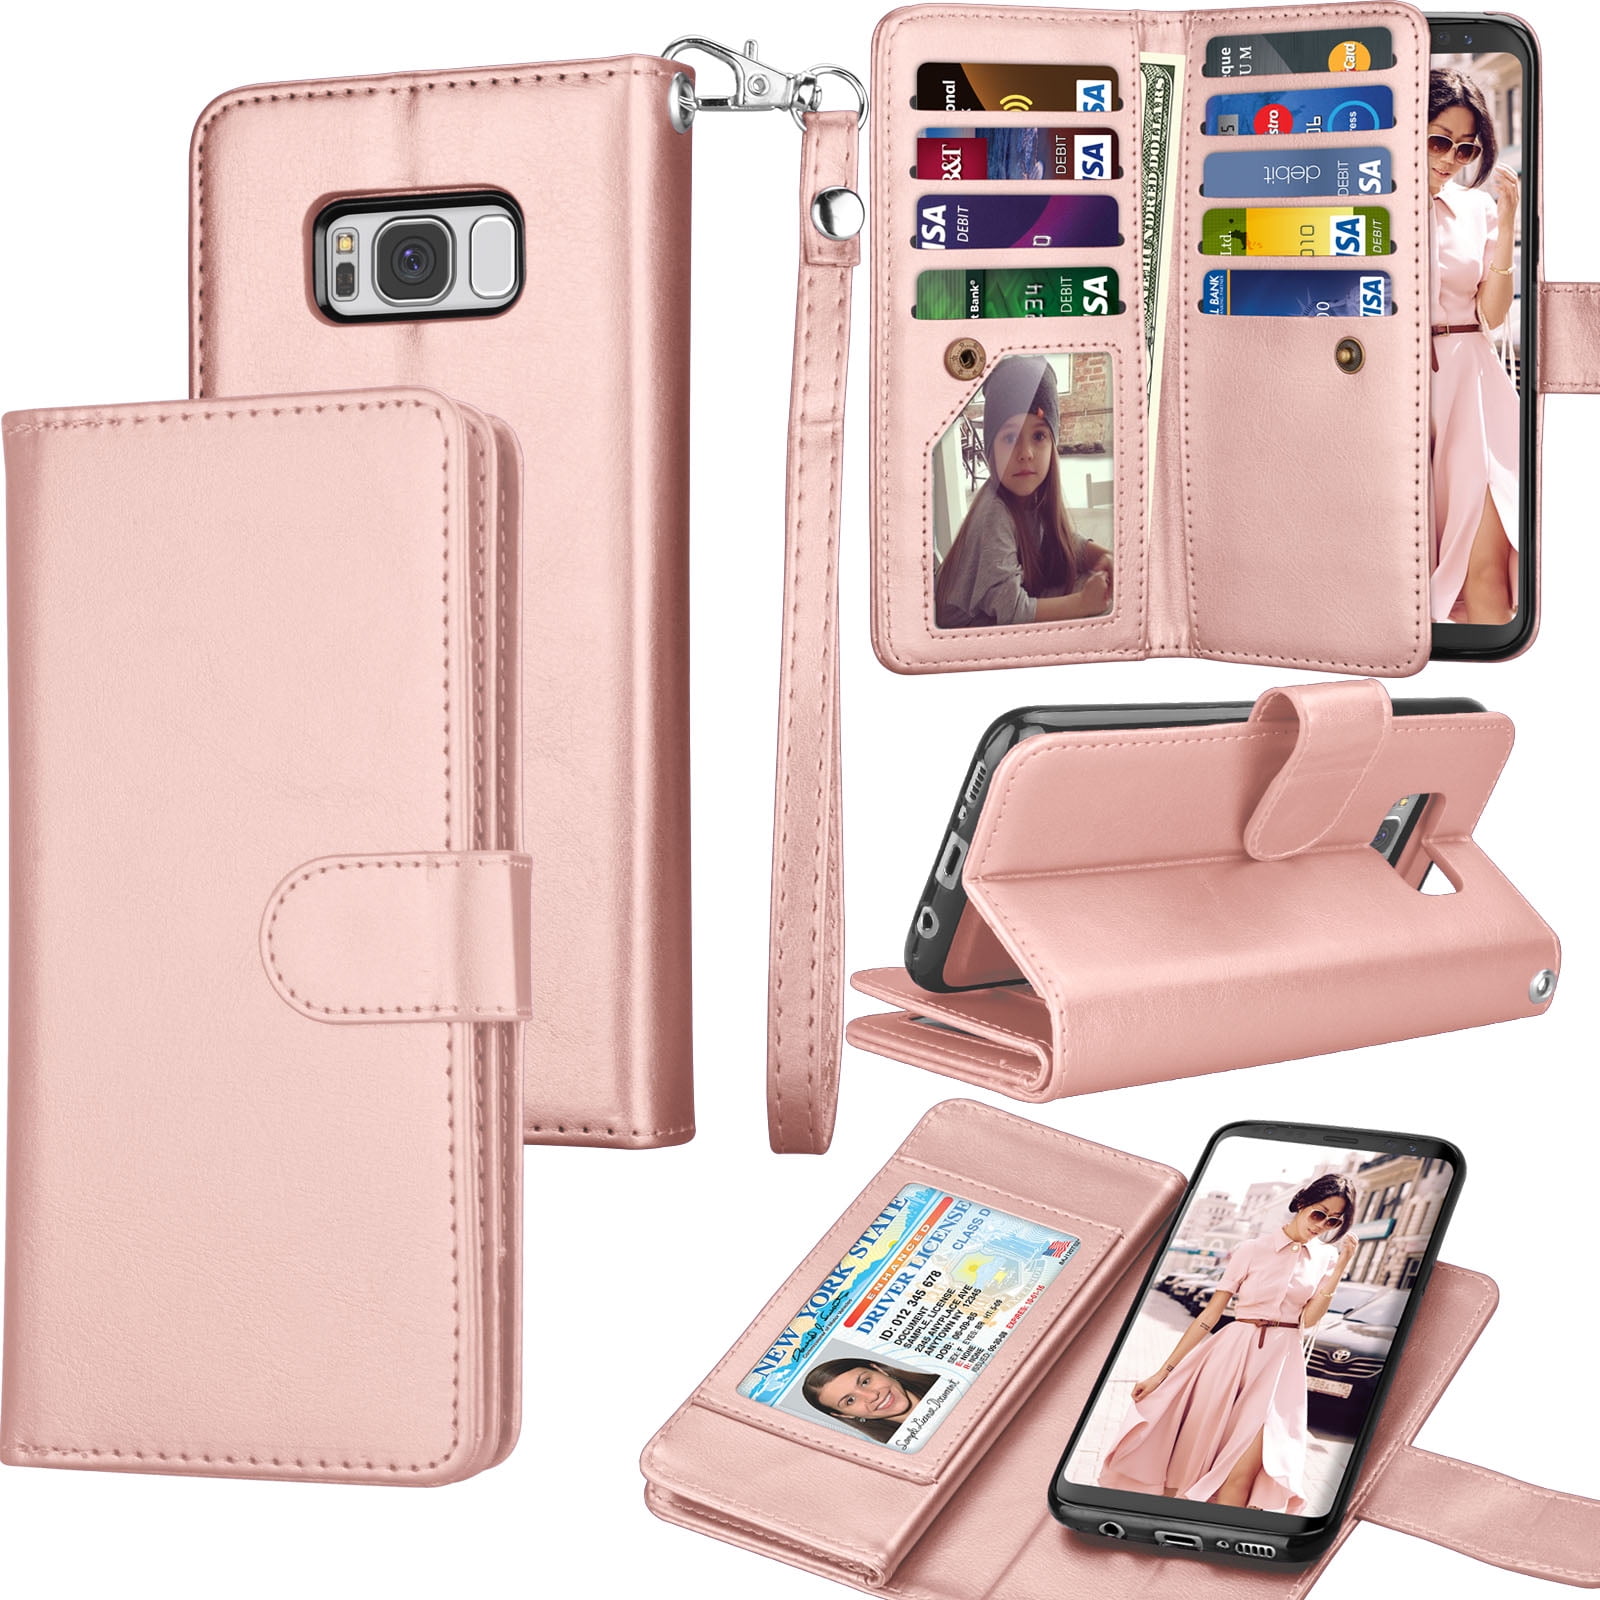 PU Leather Wallet Phone Case with Card Holder Flip Protective Cover Wrist Strap for Samsung Galaxy S8 Plus Purple Kickstand Feature FYY Designed for Samsung Galaxy S8 Plus Case